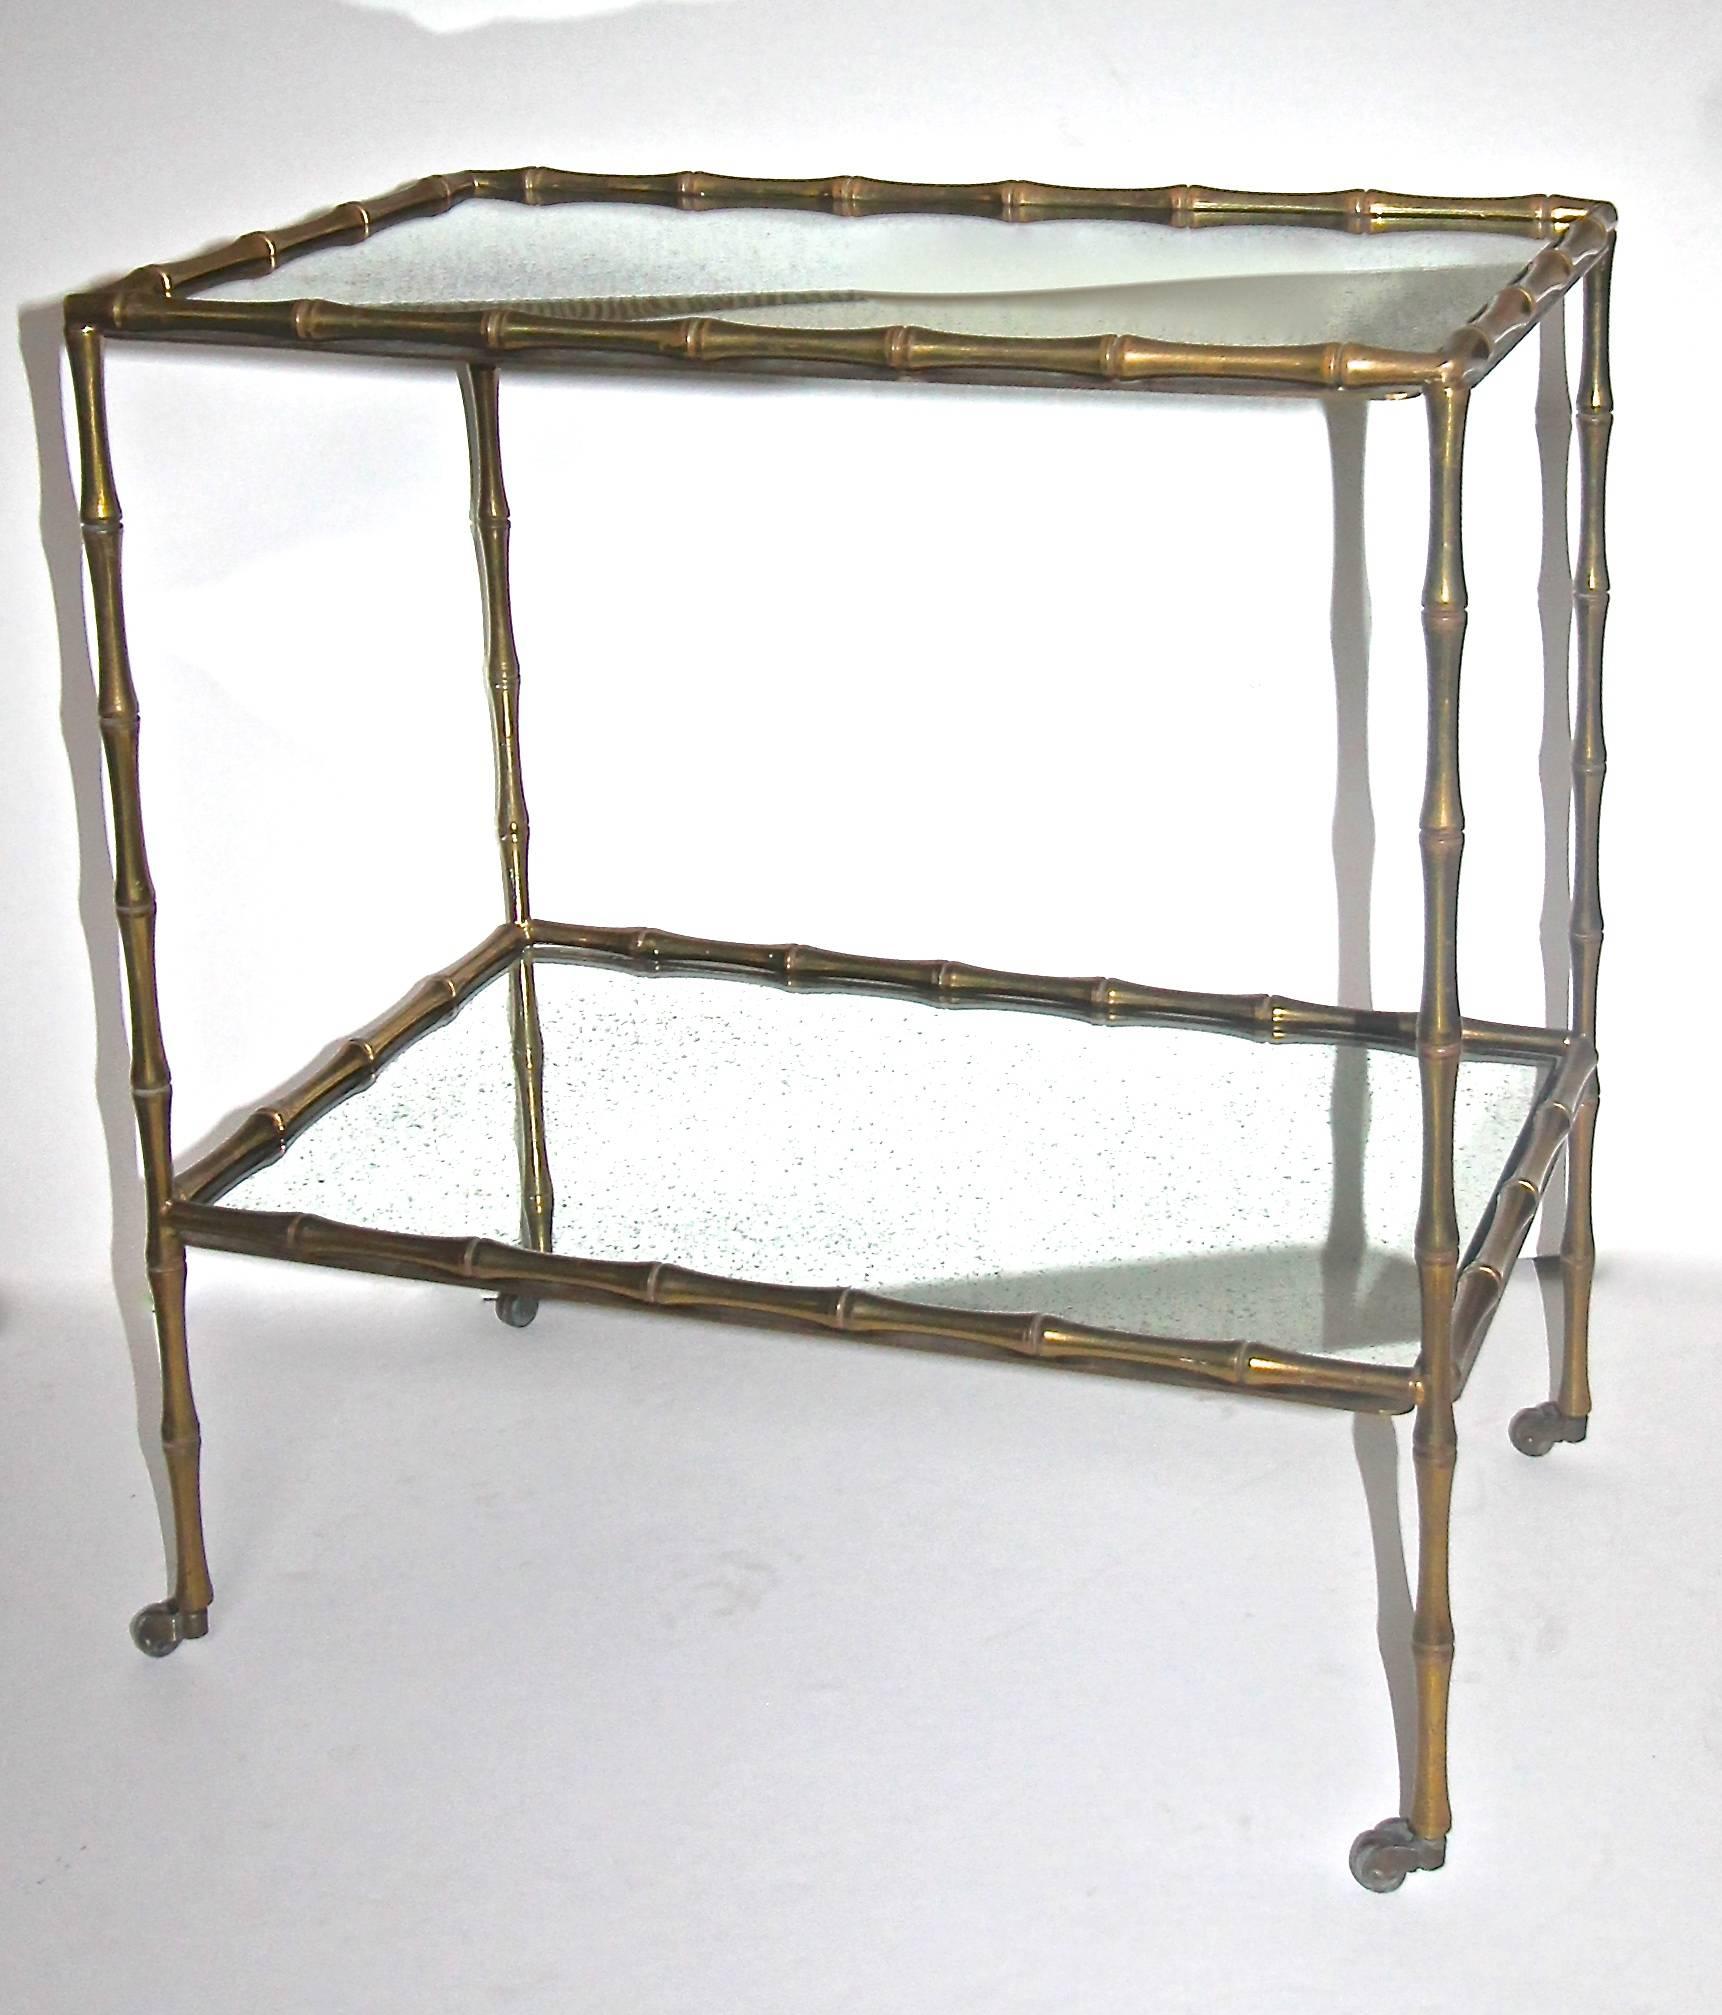 Beautiful bronze or brass faux bamboo side or end table by Maison Bagues. Table rests on four brass casters and could also be used as a bar cart or drinks table. Original inset mirrored glass tops with rich antiqued patina to mirrored backs.